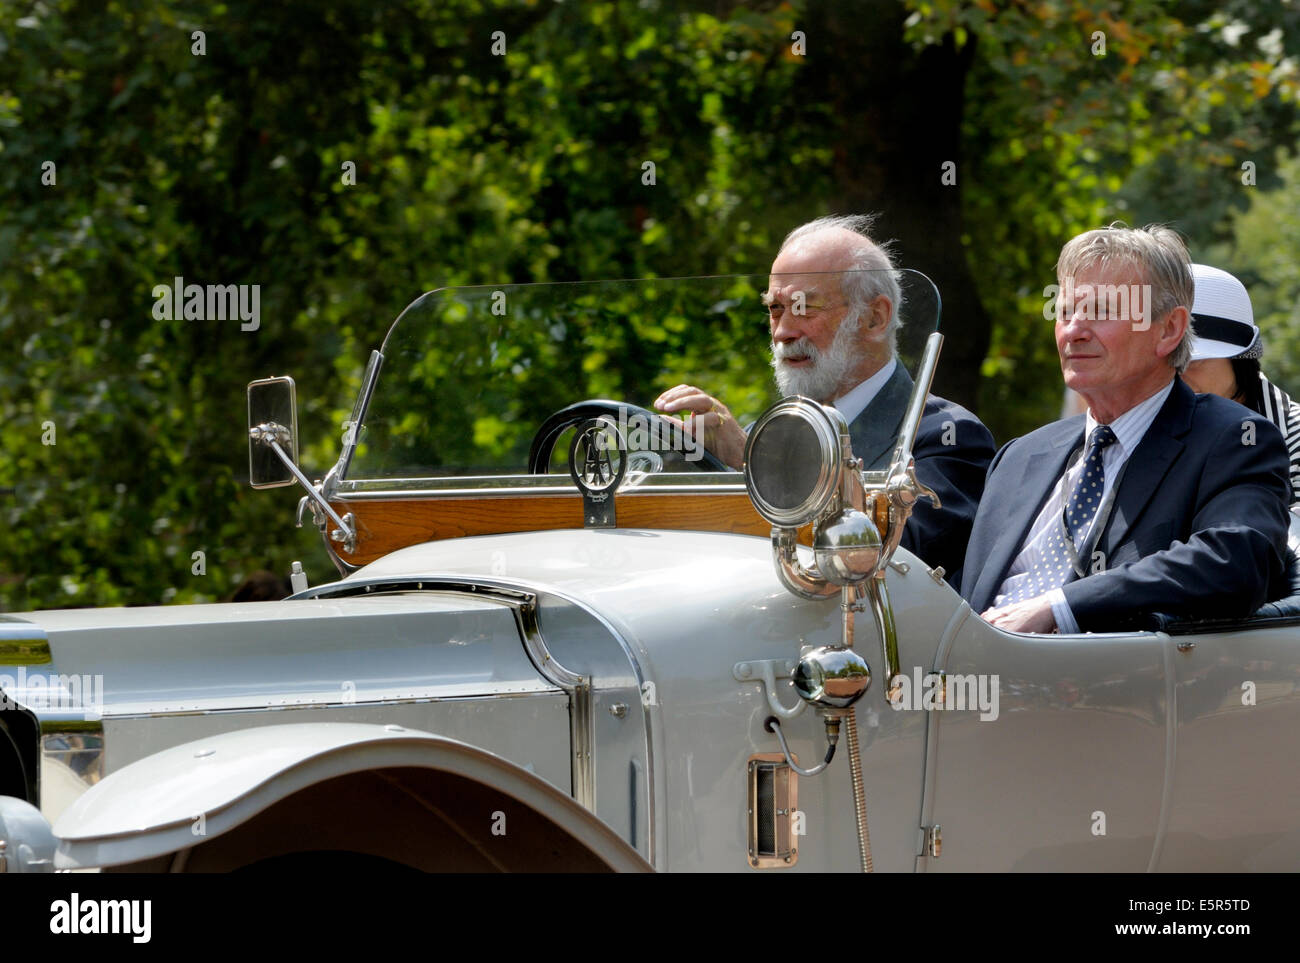 London, UK. 4th Aug, 2014.Great War Centenary Parade. HRH Prince Michael of Kent drives a vintage 1912 Vauxhall A Type (YK-1437) in the Mall. Stock Photo